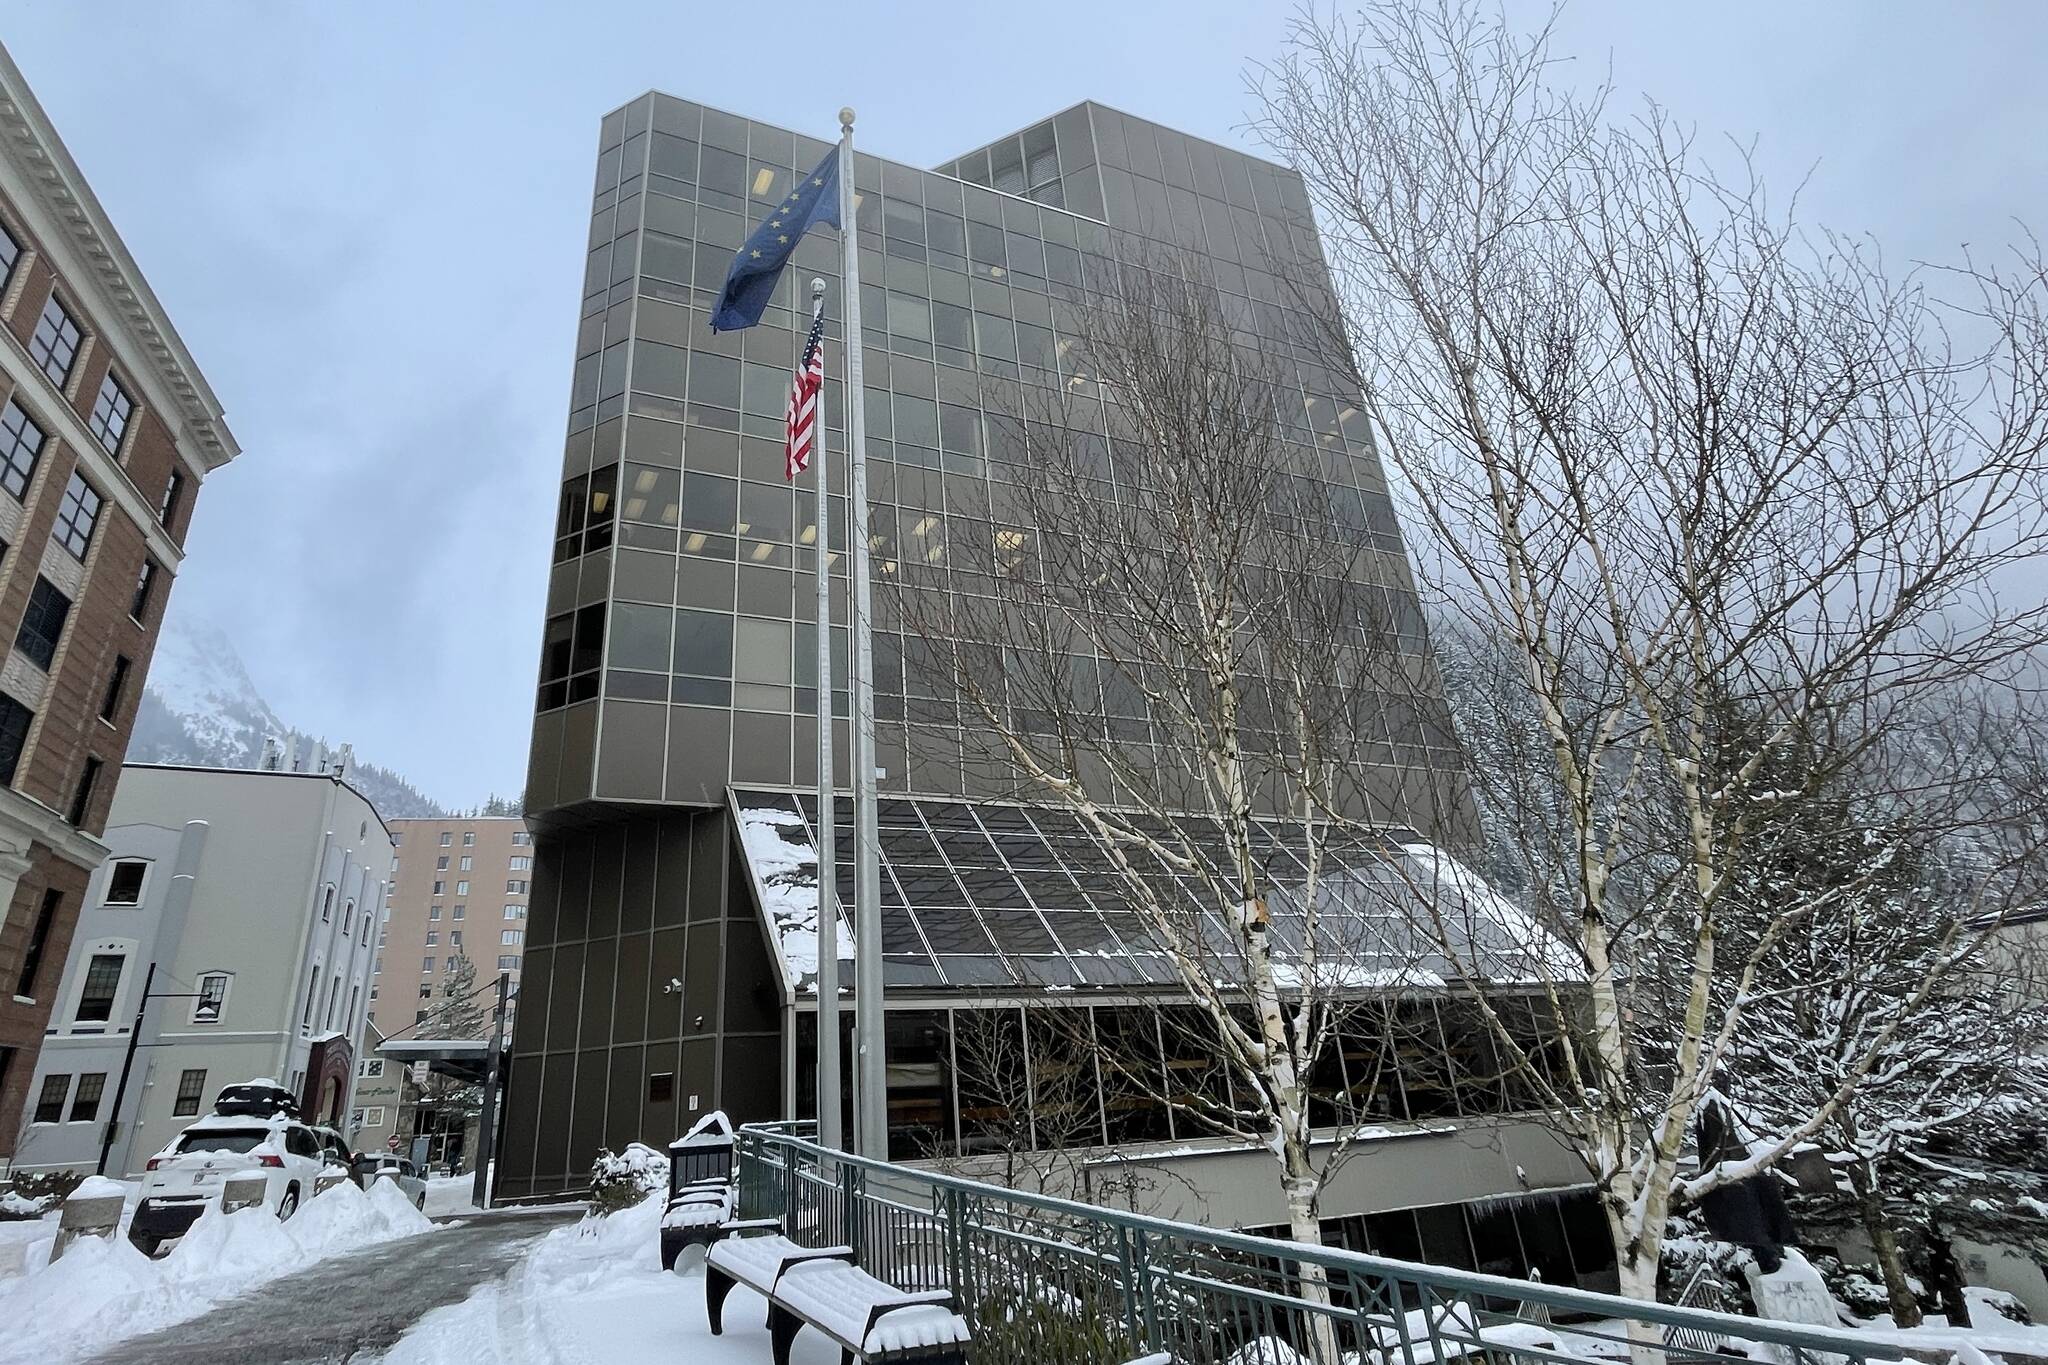 A Juneau man arrested in 2019 for more than a dozen charges including multiple sexual-related felonies was found guilty during a jury trial on Feb. 1, 2022. (Michael S. Lockett / Juneau Empire)